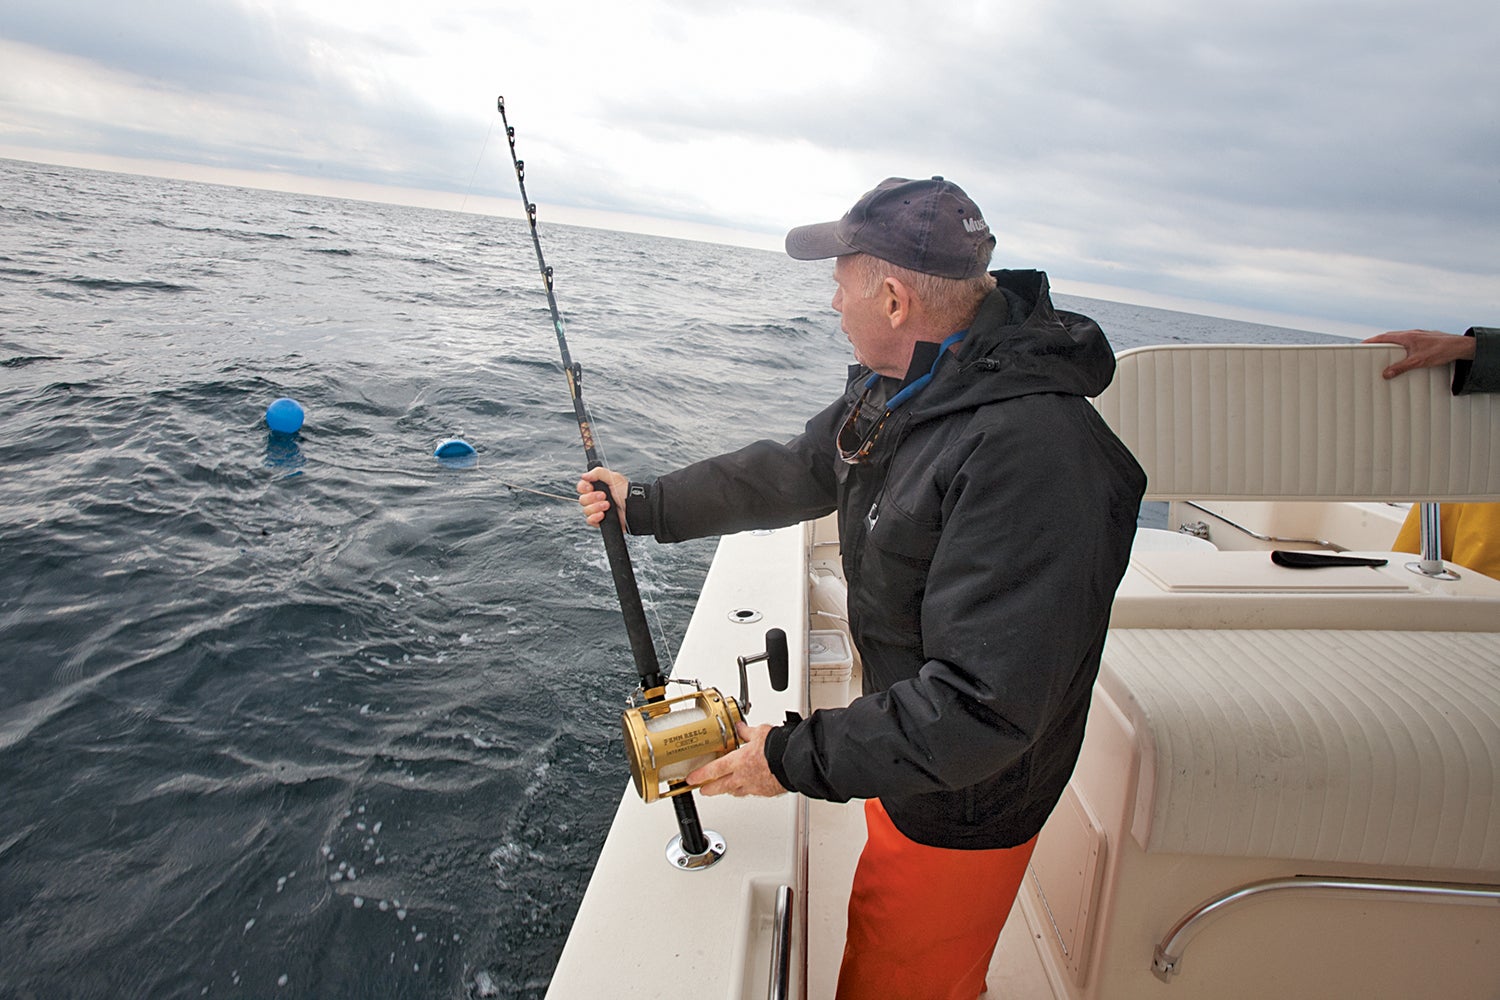 Angler lets bait buckets out of the back of the fishing boat.